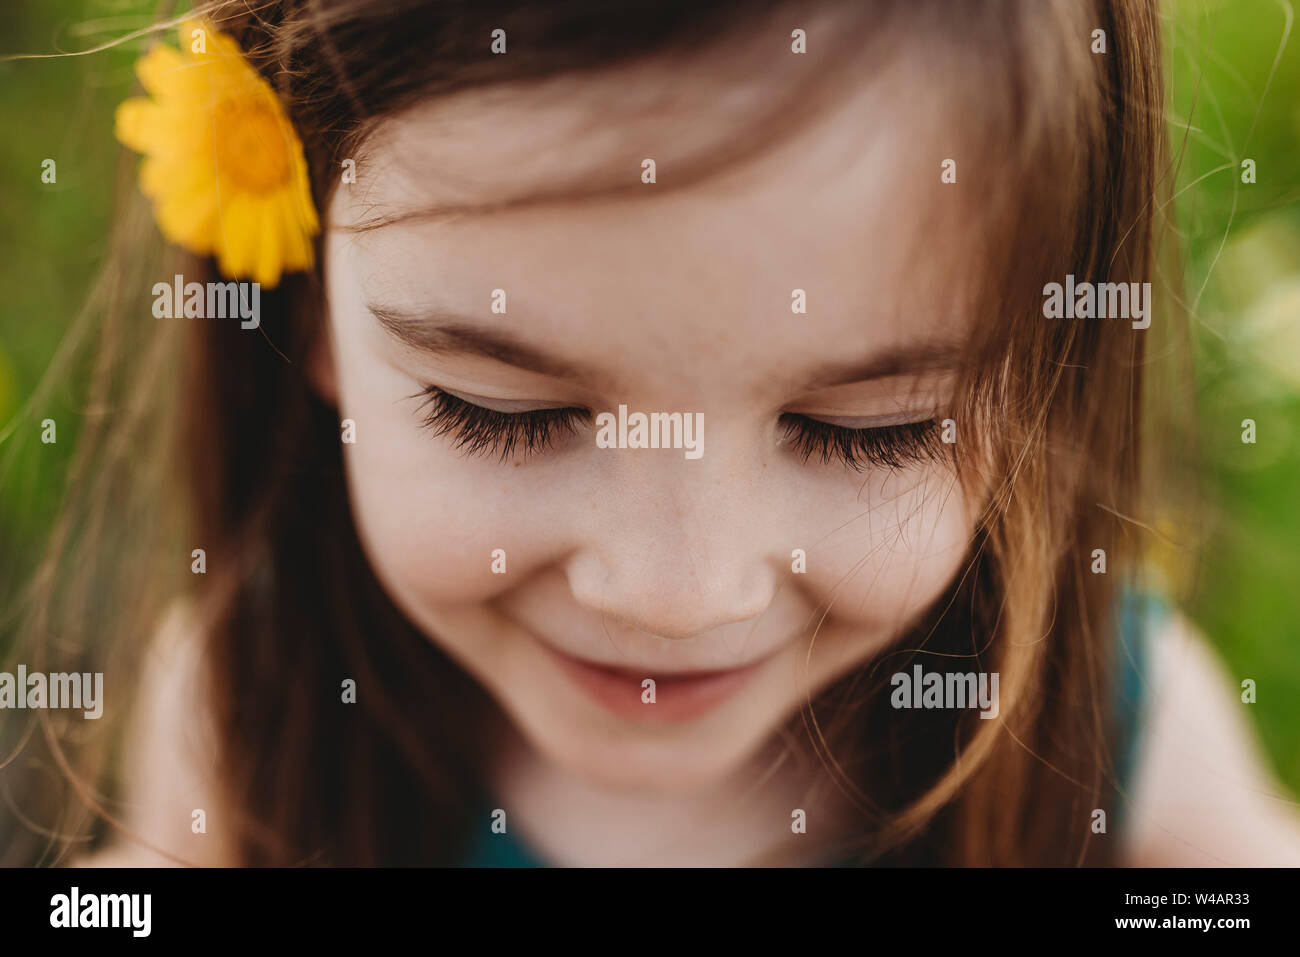 Close up portrait of little girl with eyes closed and smiling Stock Photo